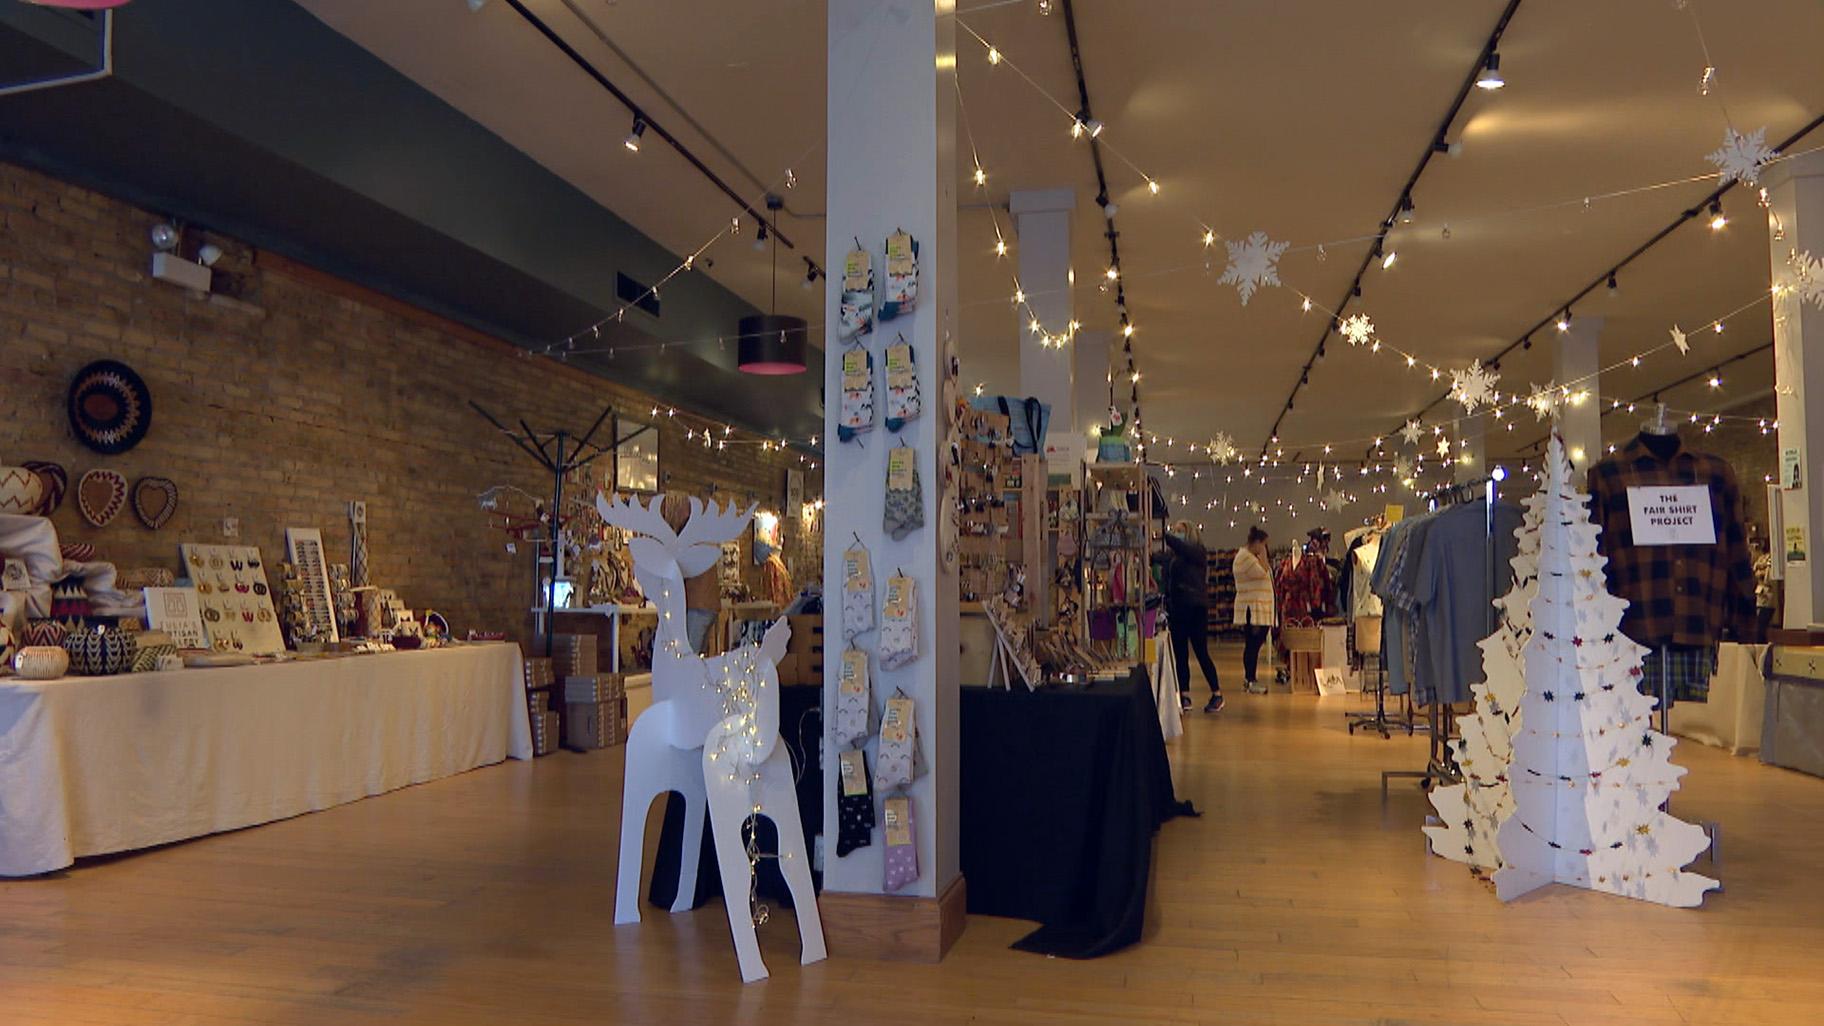 In Andersonville, Chicago Fair Trade is hosting its 8th annual holiday pop-up store until December 24 with a wide range of handmade items, from home decor to jewelry from over 30 countries.  (WTTW News)